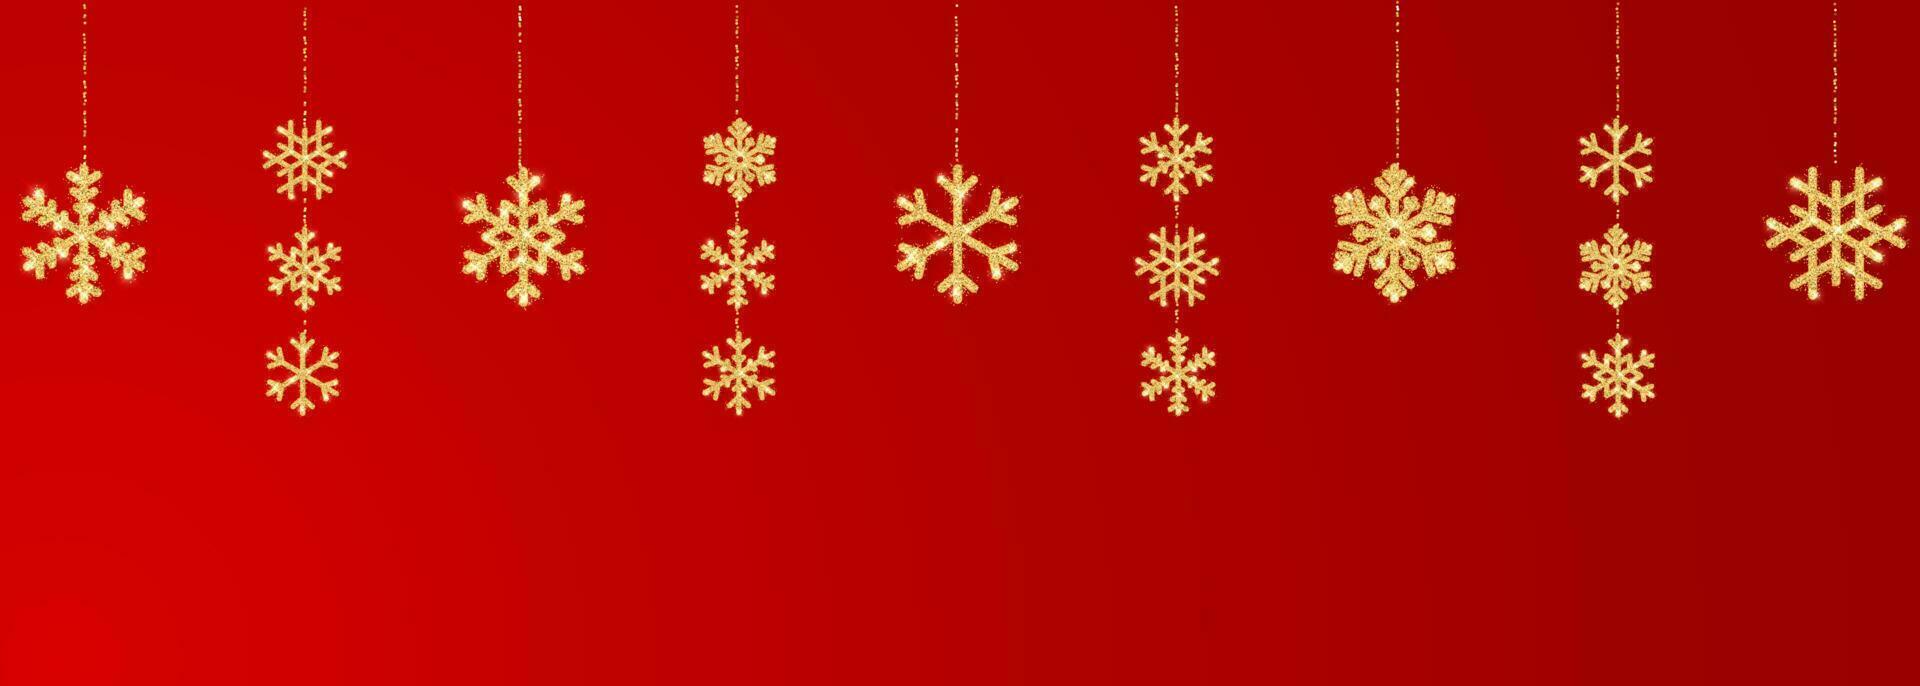 Christmas or New Year golden snowflake decoration garland on red background. Hanging glitter snowflake. Vector illustration